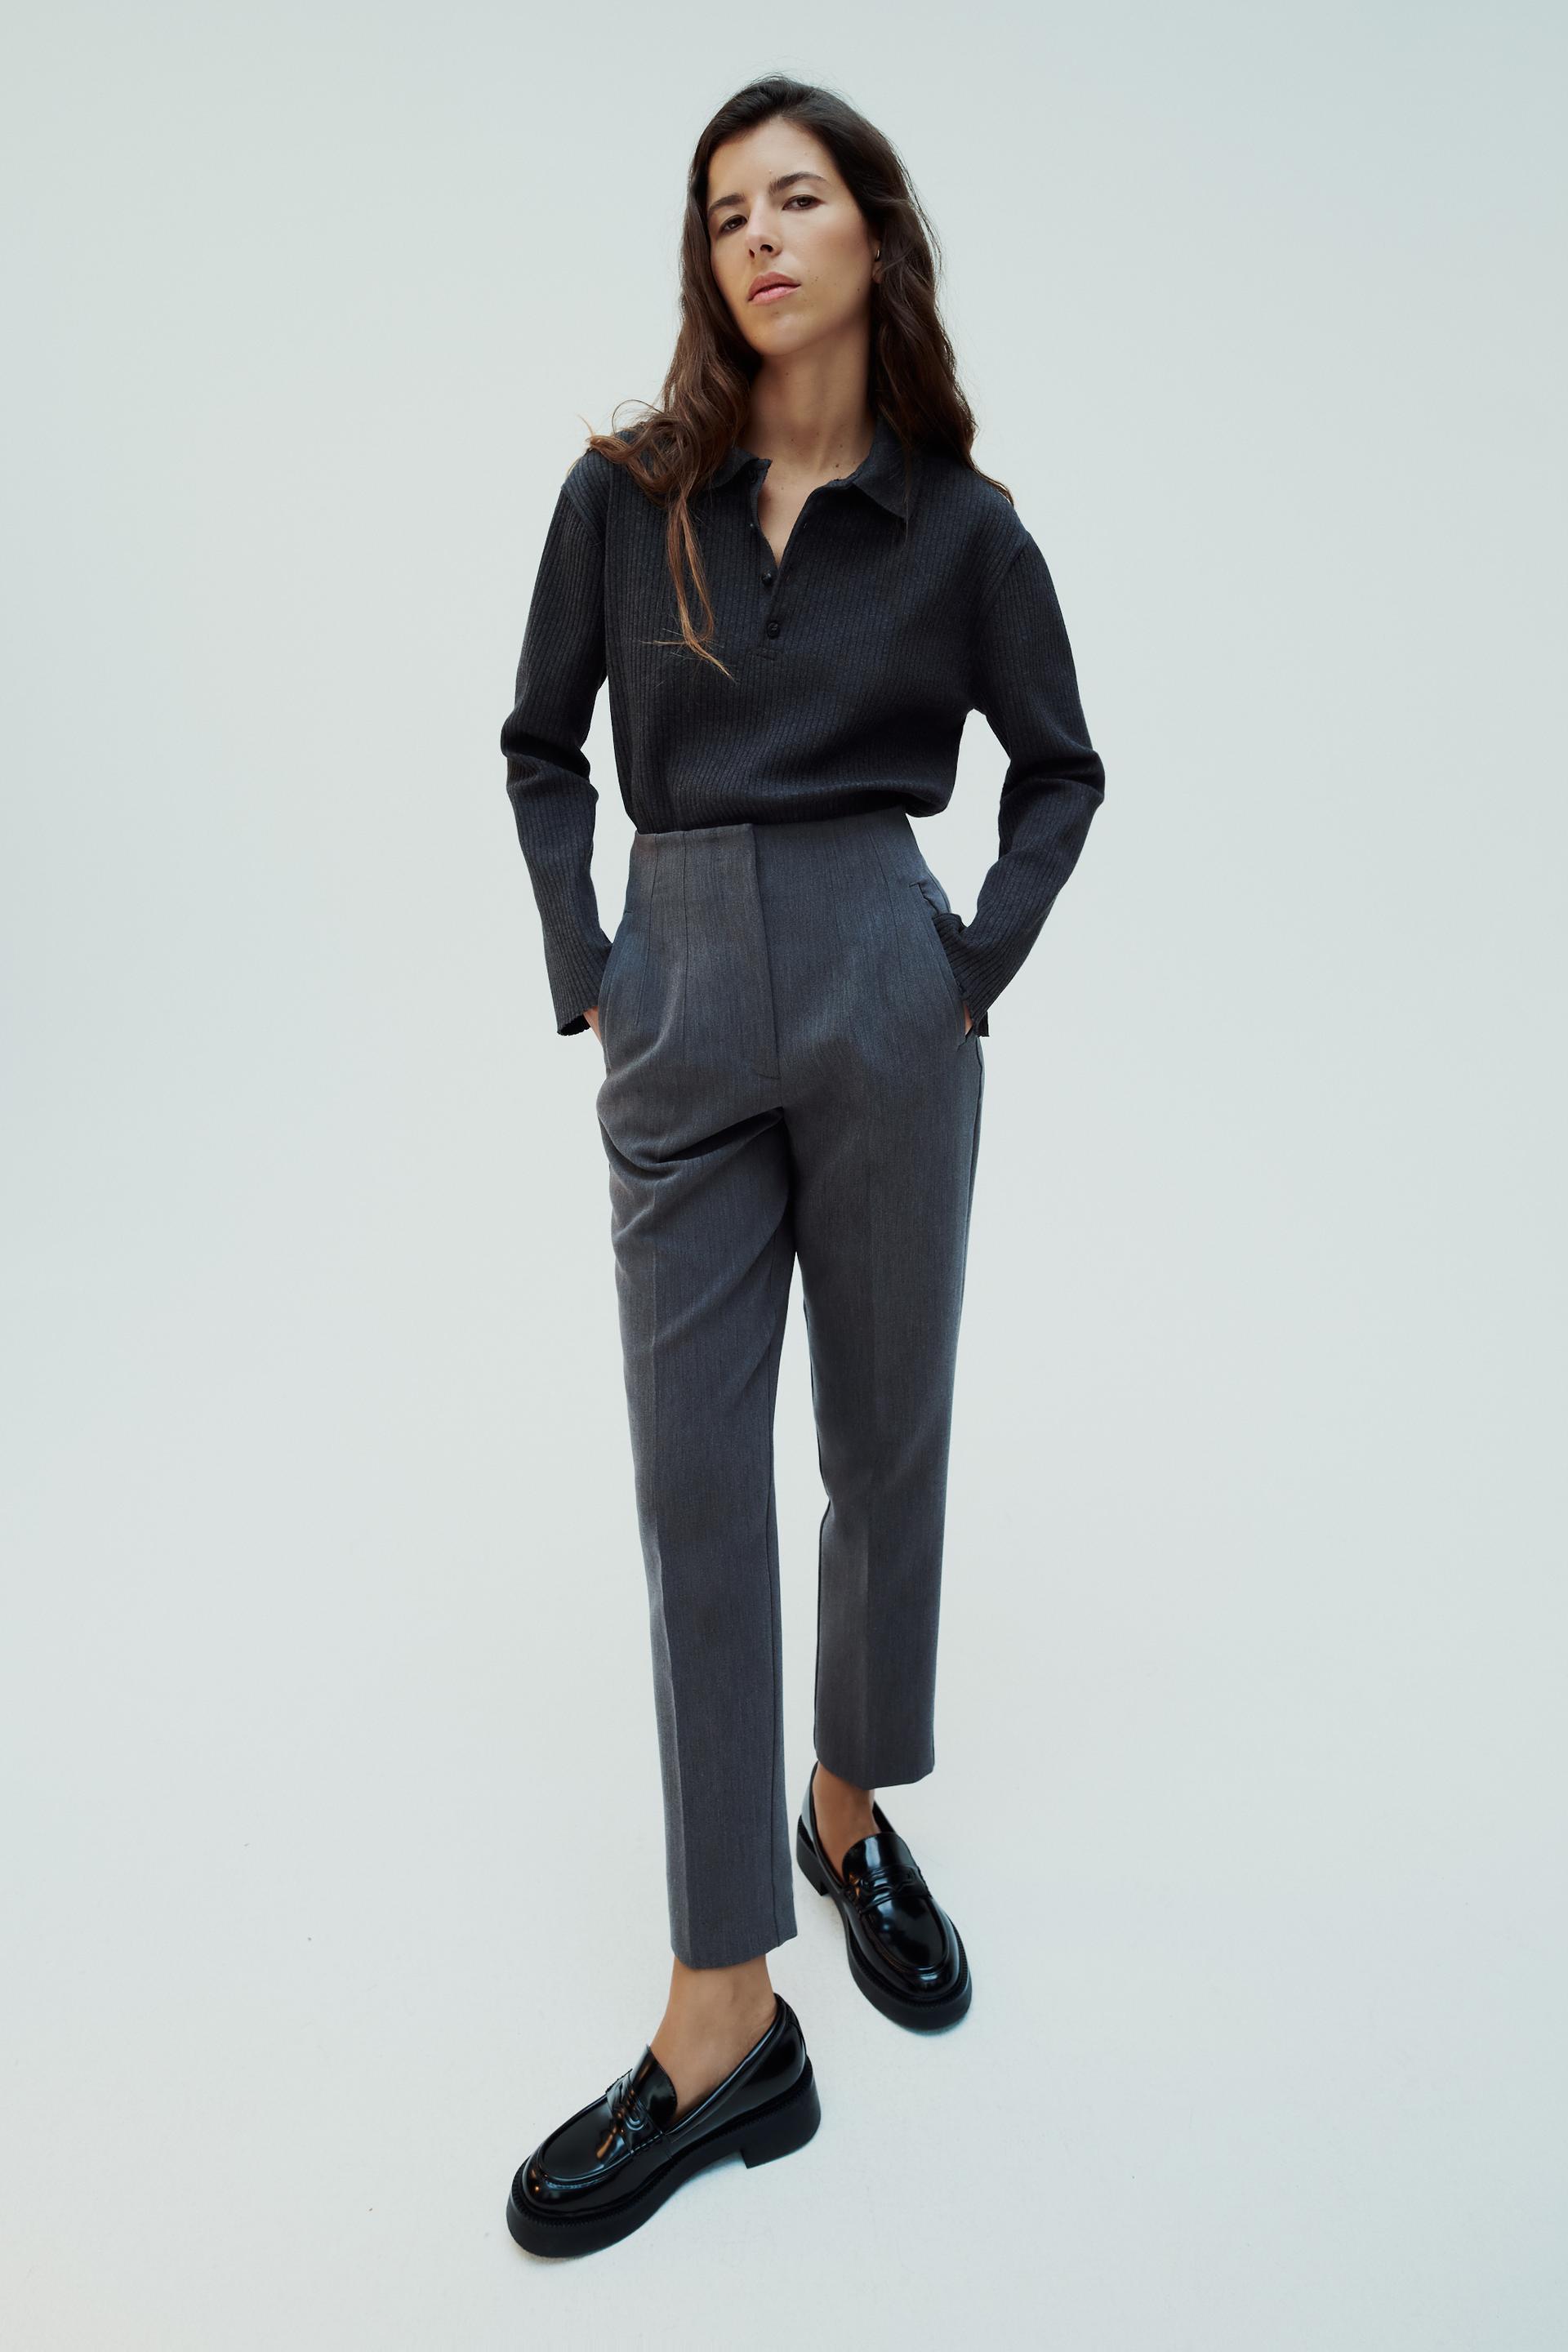 How To Style Zara High Waisted Trousers - Digitaldaybook